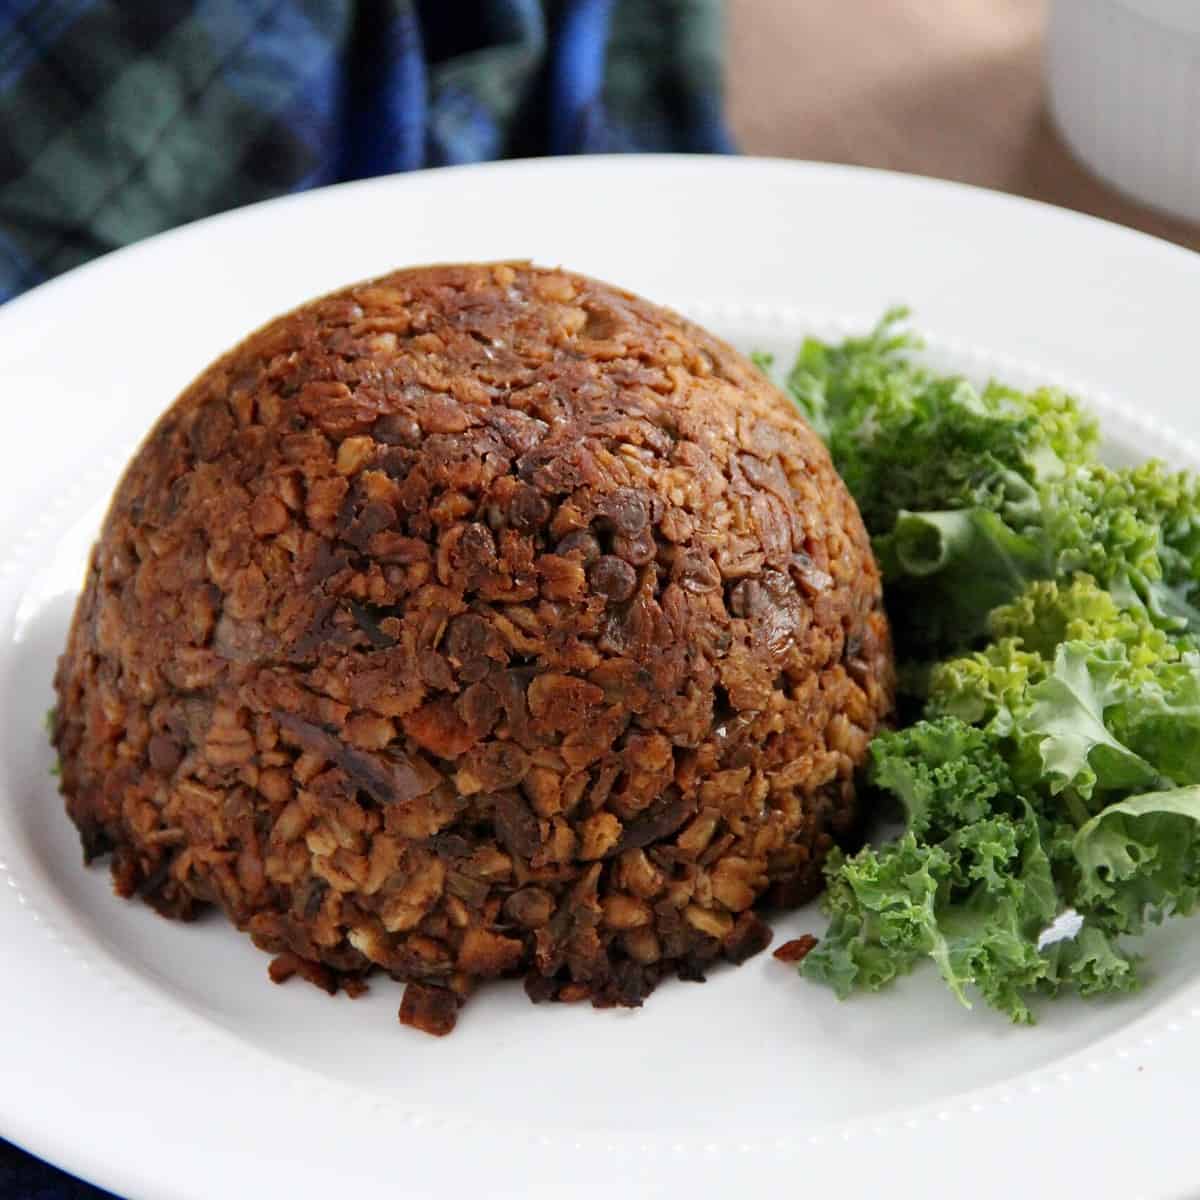  This vegan-friendly version of Haggis is sure to impress even the most skeptical of carnivores.